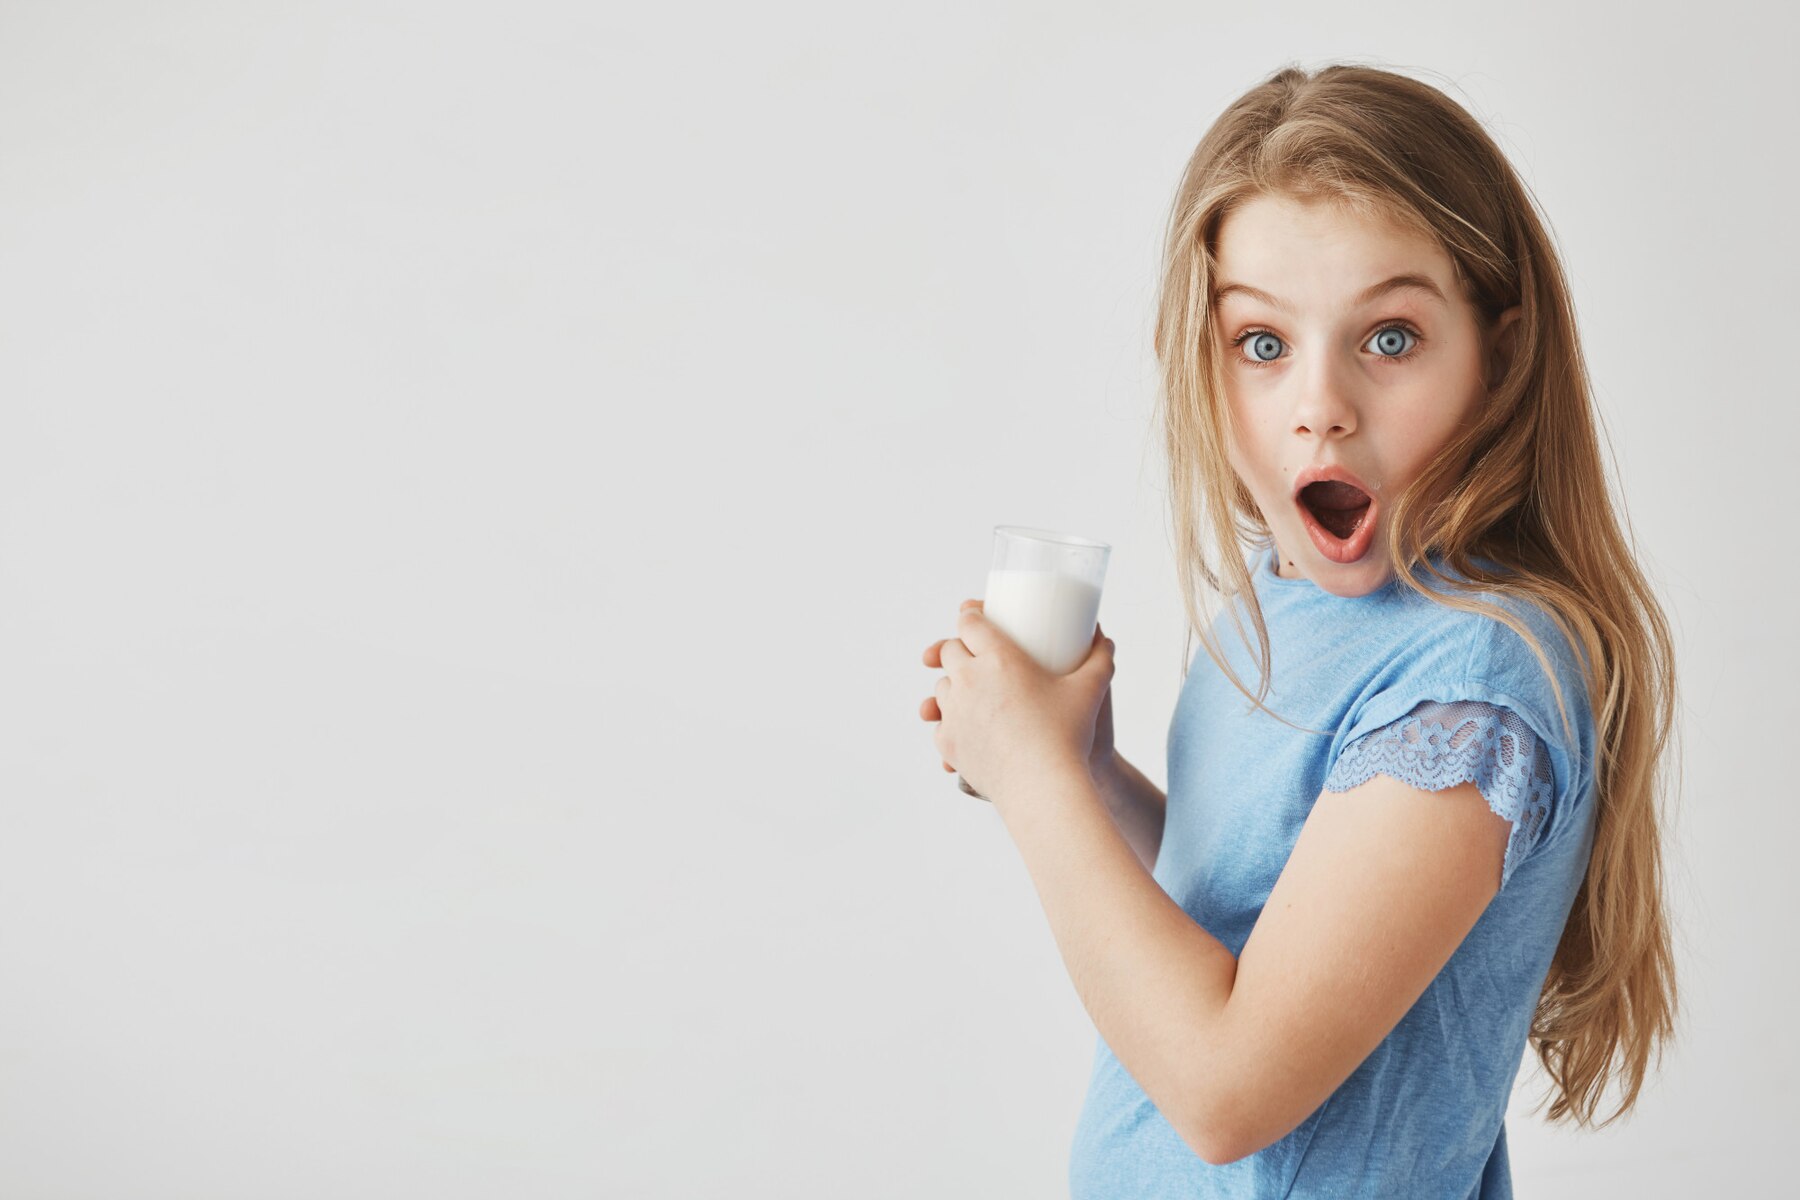 close-up-portrait-of-funny-good-looking-little-girl-with-light-hair-with-shocked-expression-holding-glass-of-milk-with-hands_176420-10227.jpg